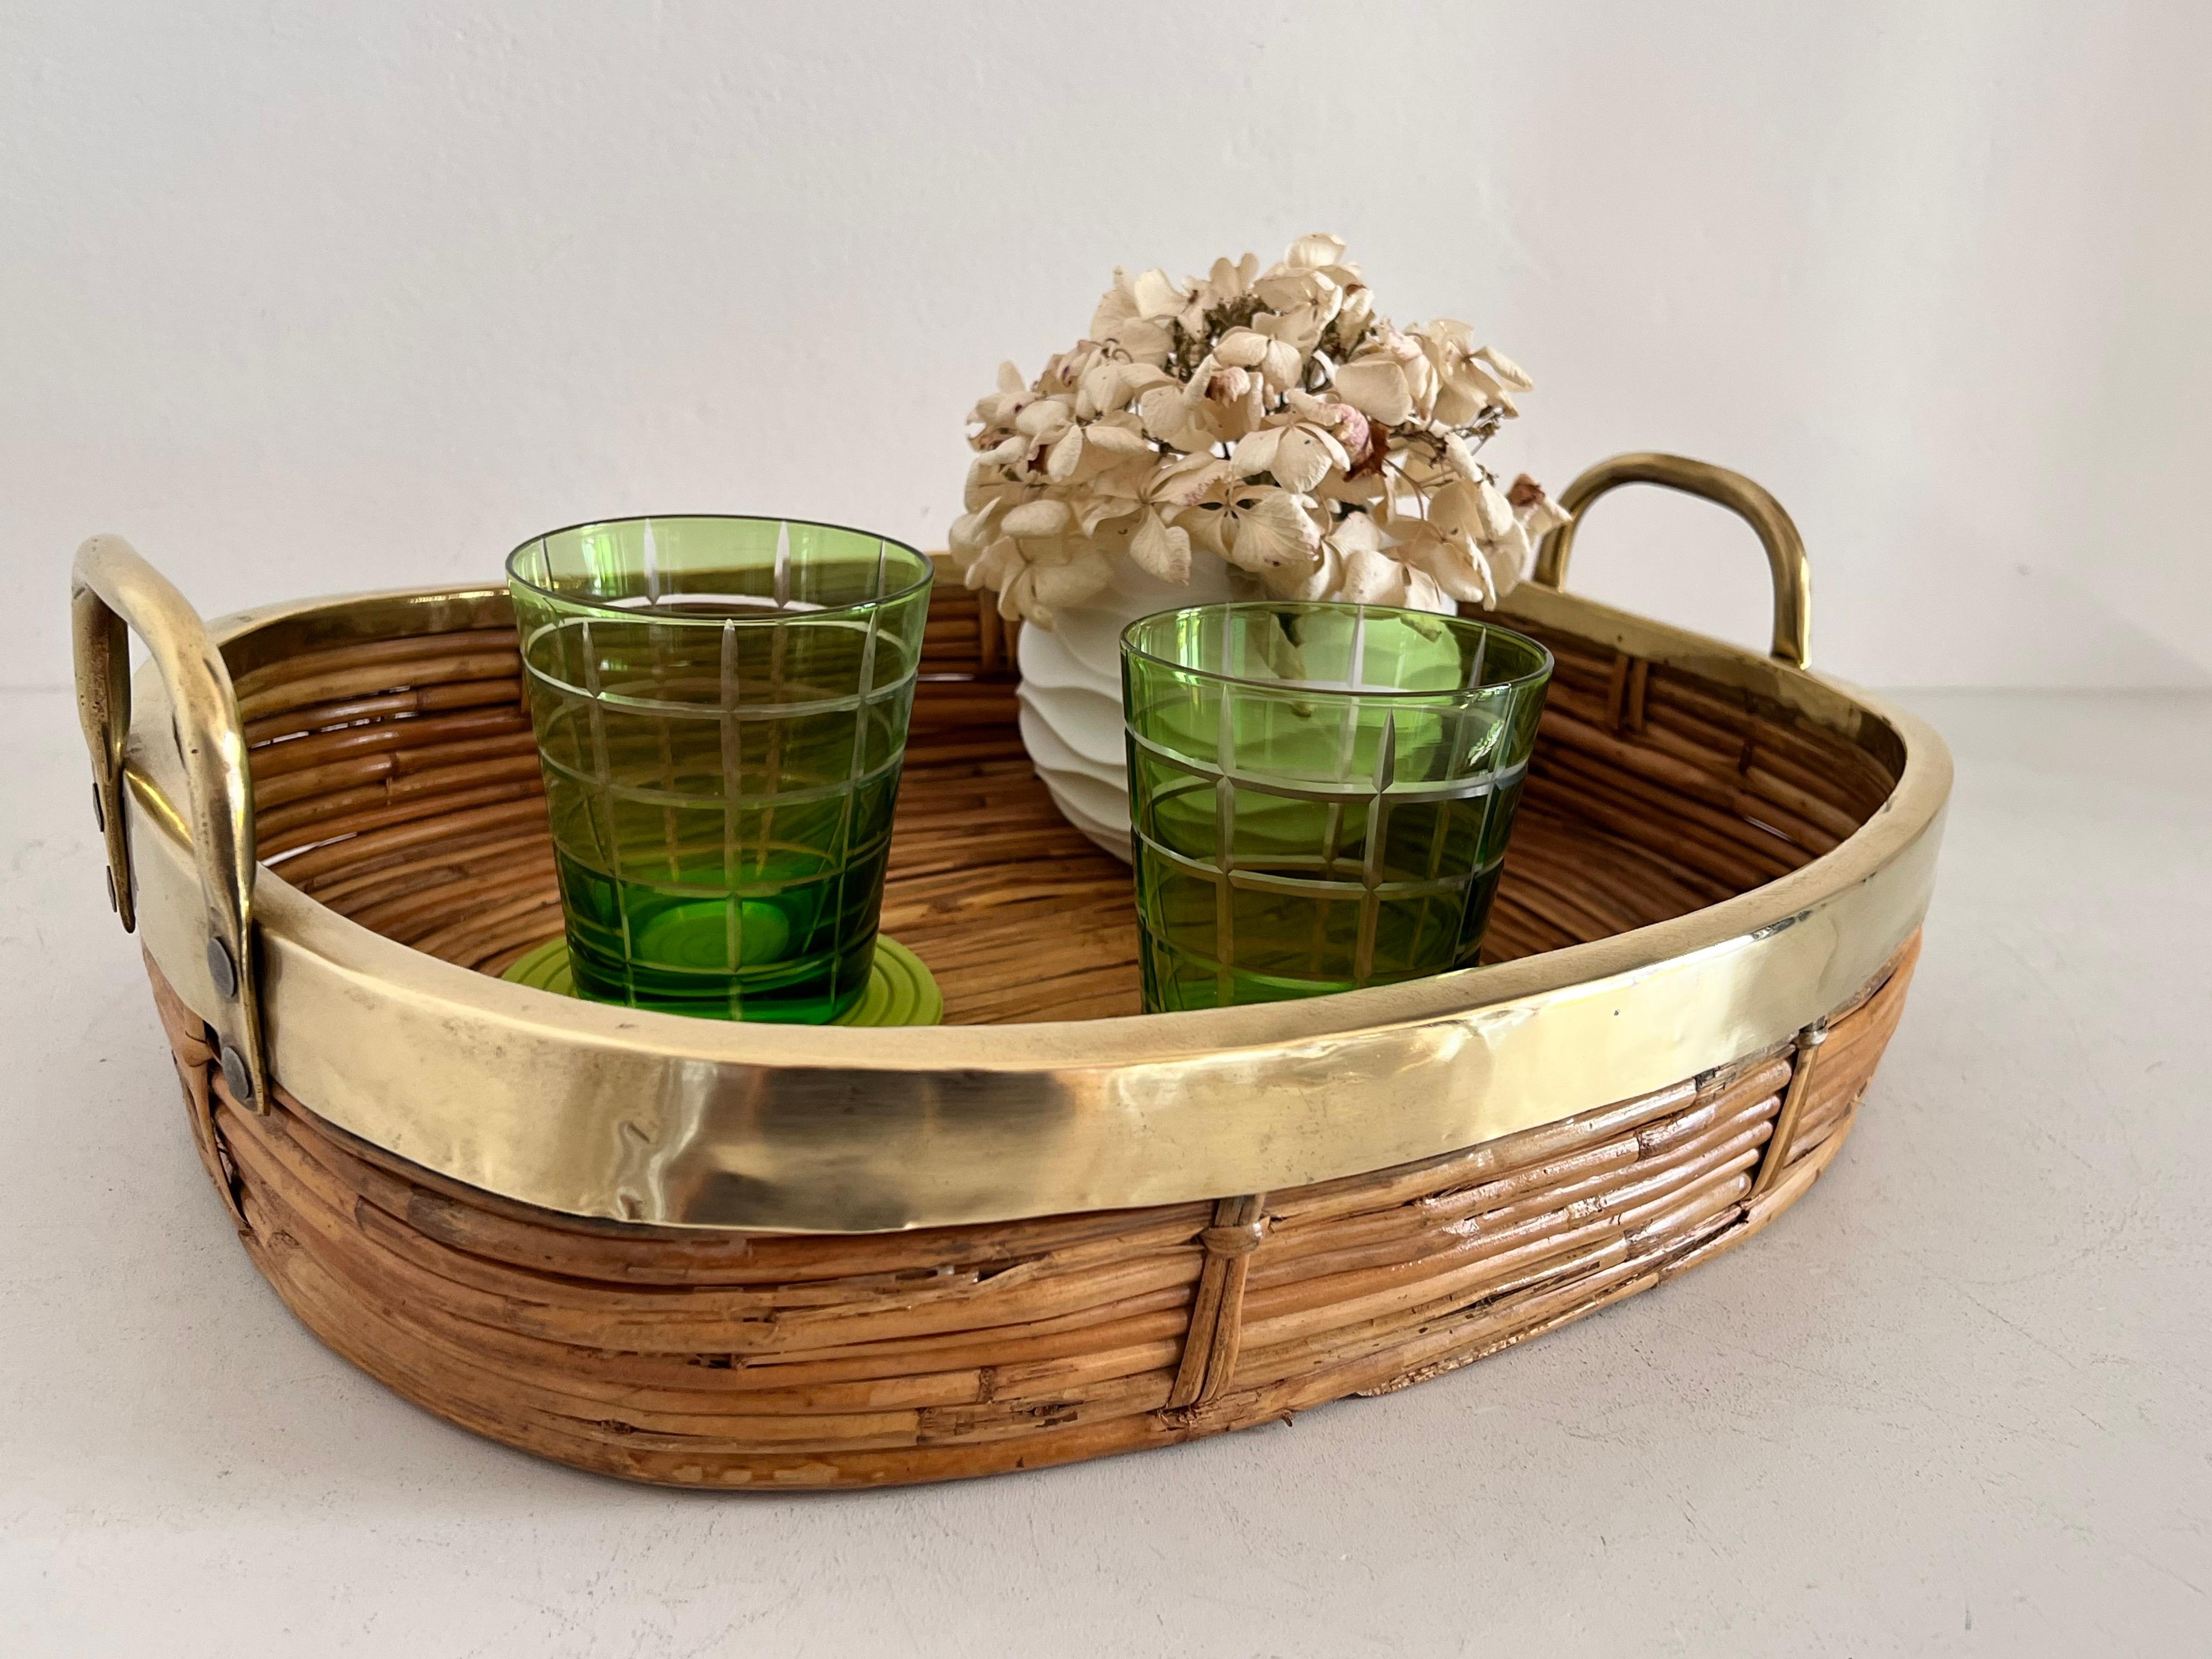 Beautiful vintage serving tray made of rattan - bamboo and thick frame and handles of shiny brass with patina.
Made in Italy in the 1970s, during the period of Hollywood Regency, very much in the style of Gabriella Crespi.
This kind of furniture